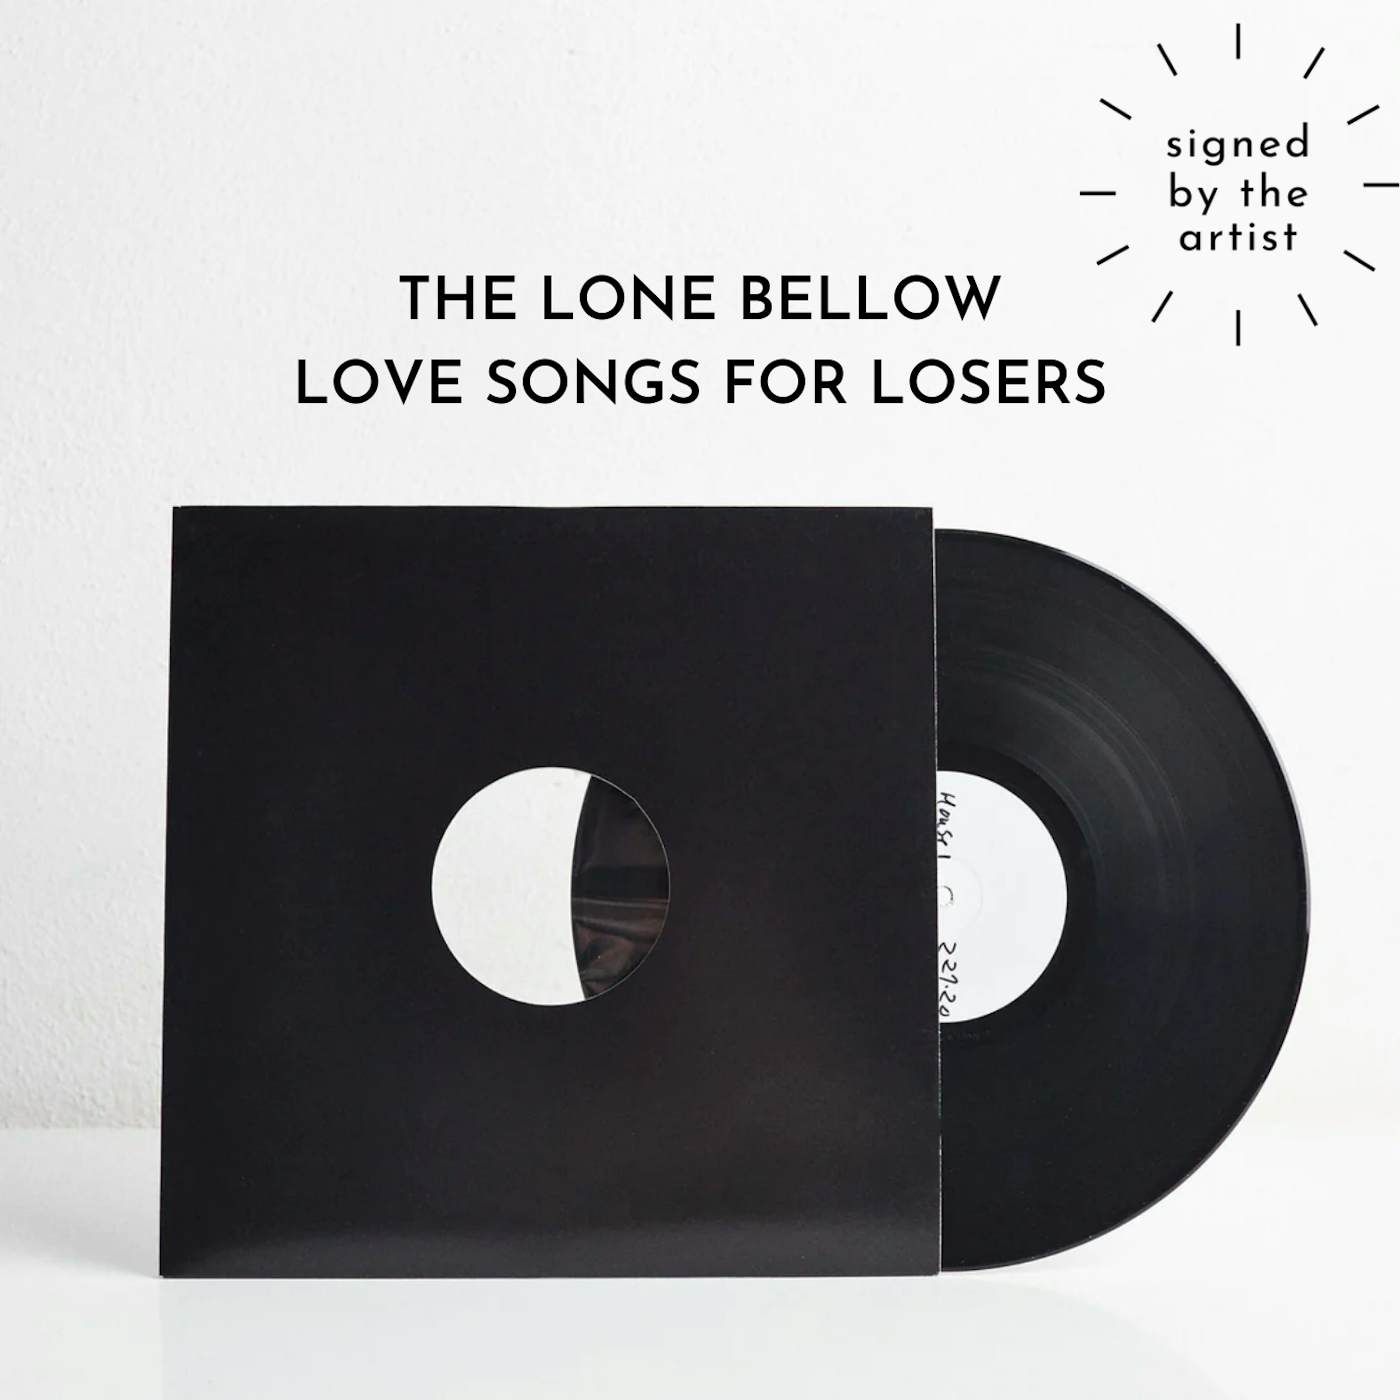 The Lone Bellow Love Songs for Losers (Signed Test Pressing)